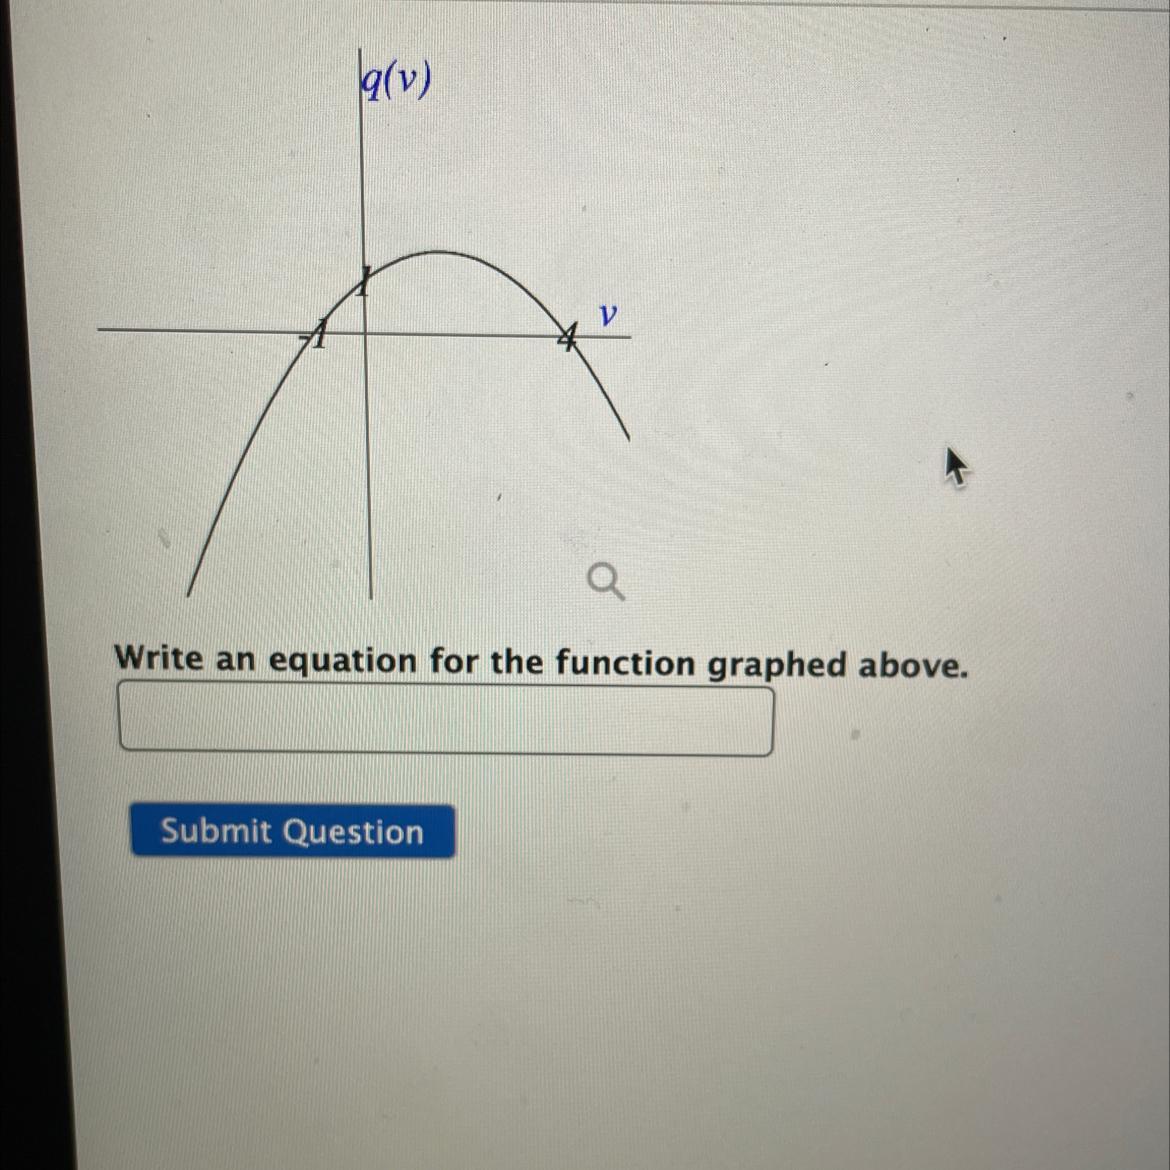 Please Help I Have A Test On This And Im Not Sure How To Do This